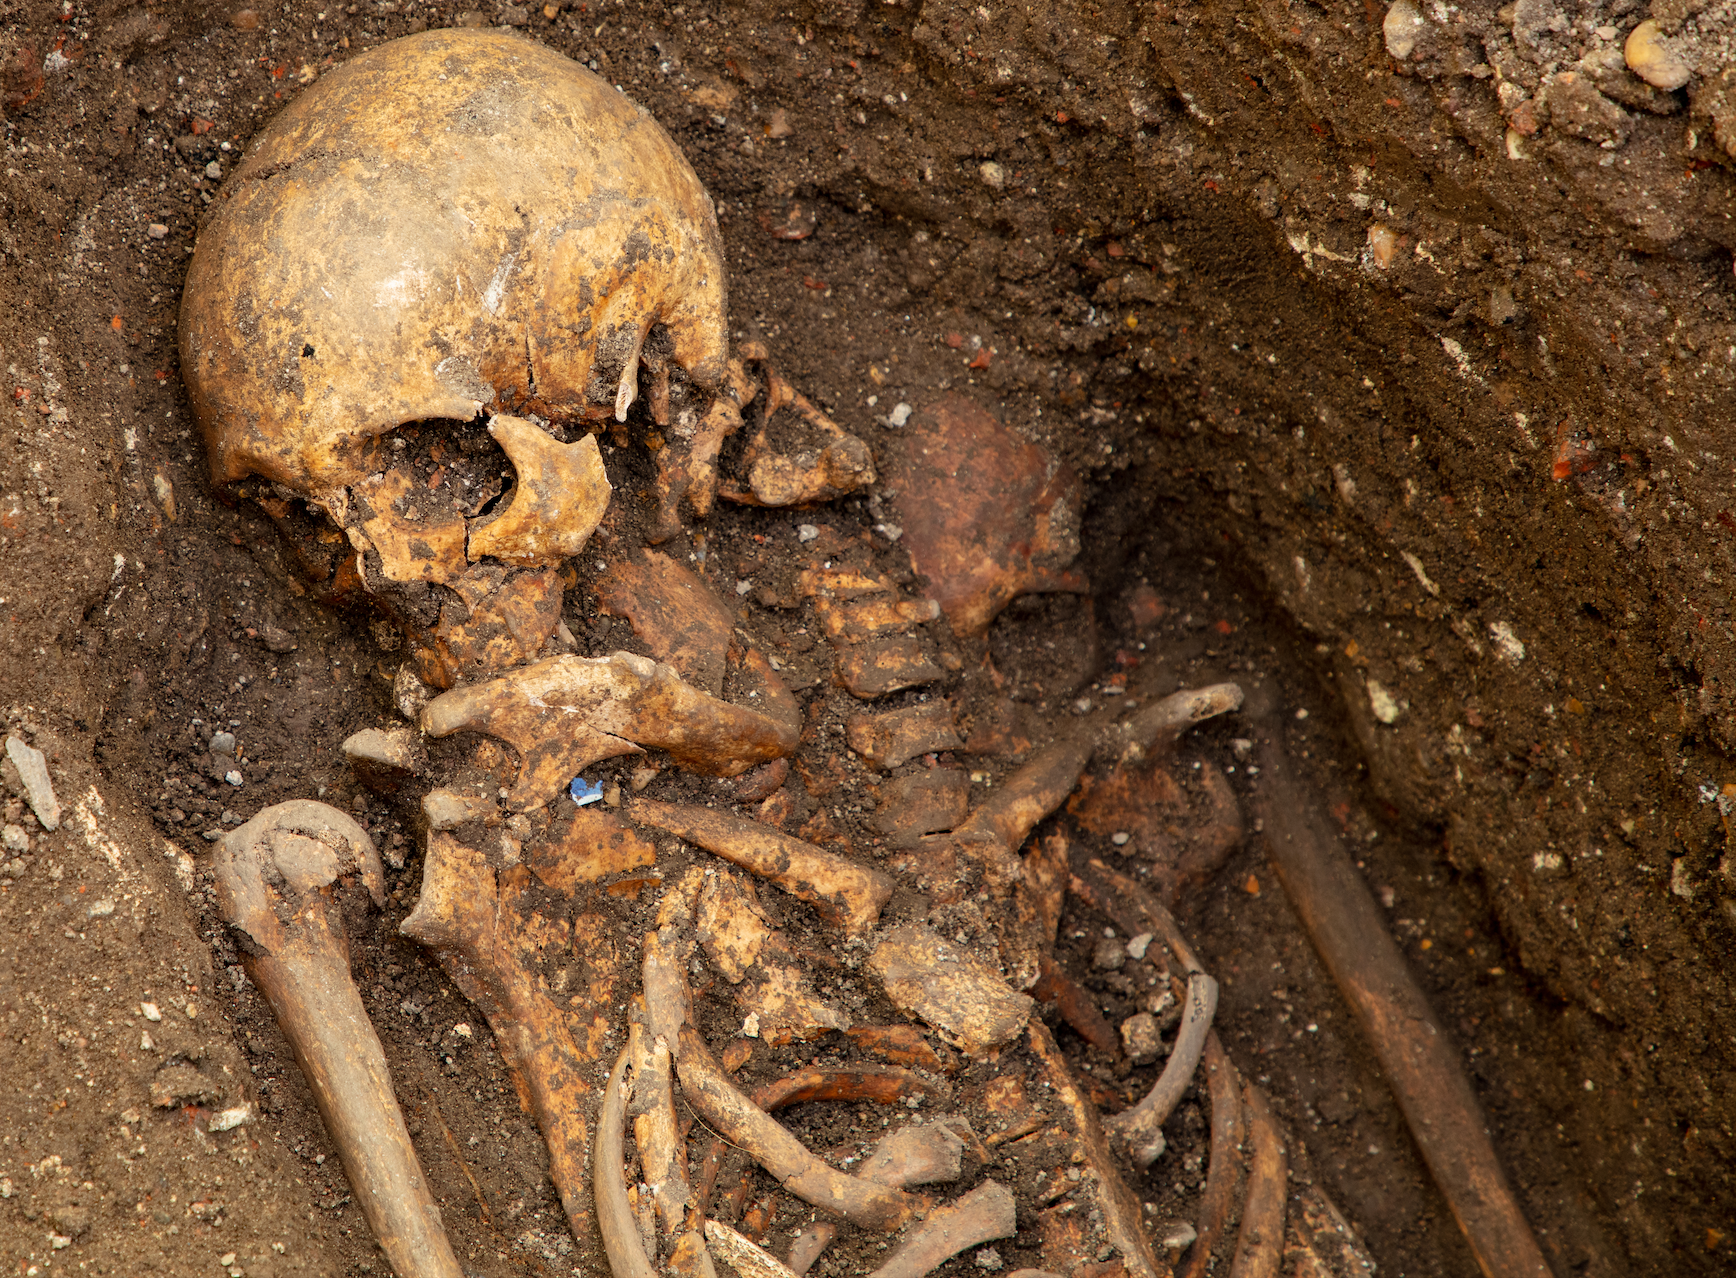 Many skeletons show the bodies were dissected before burial